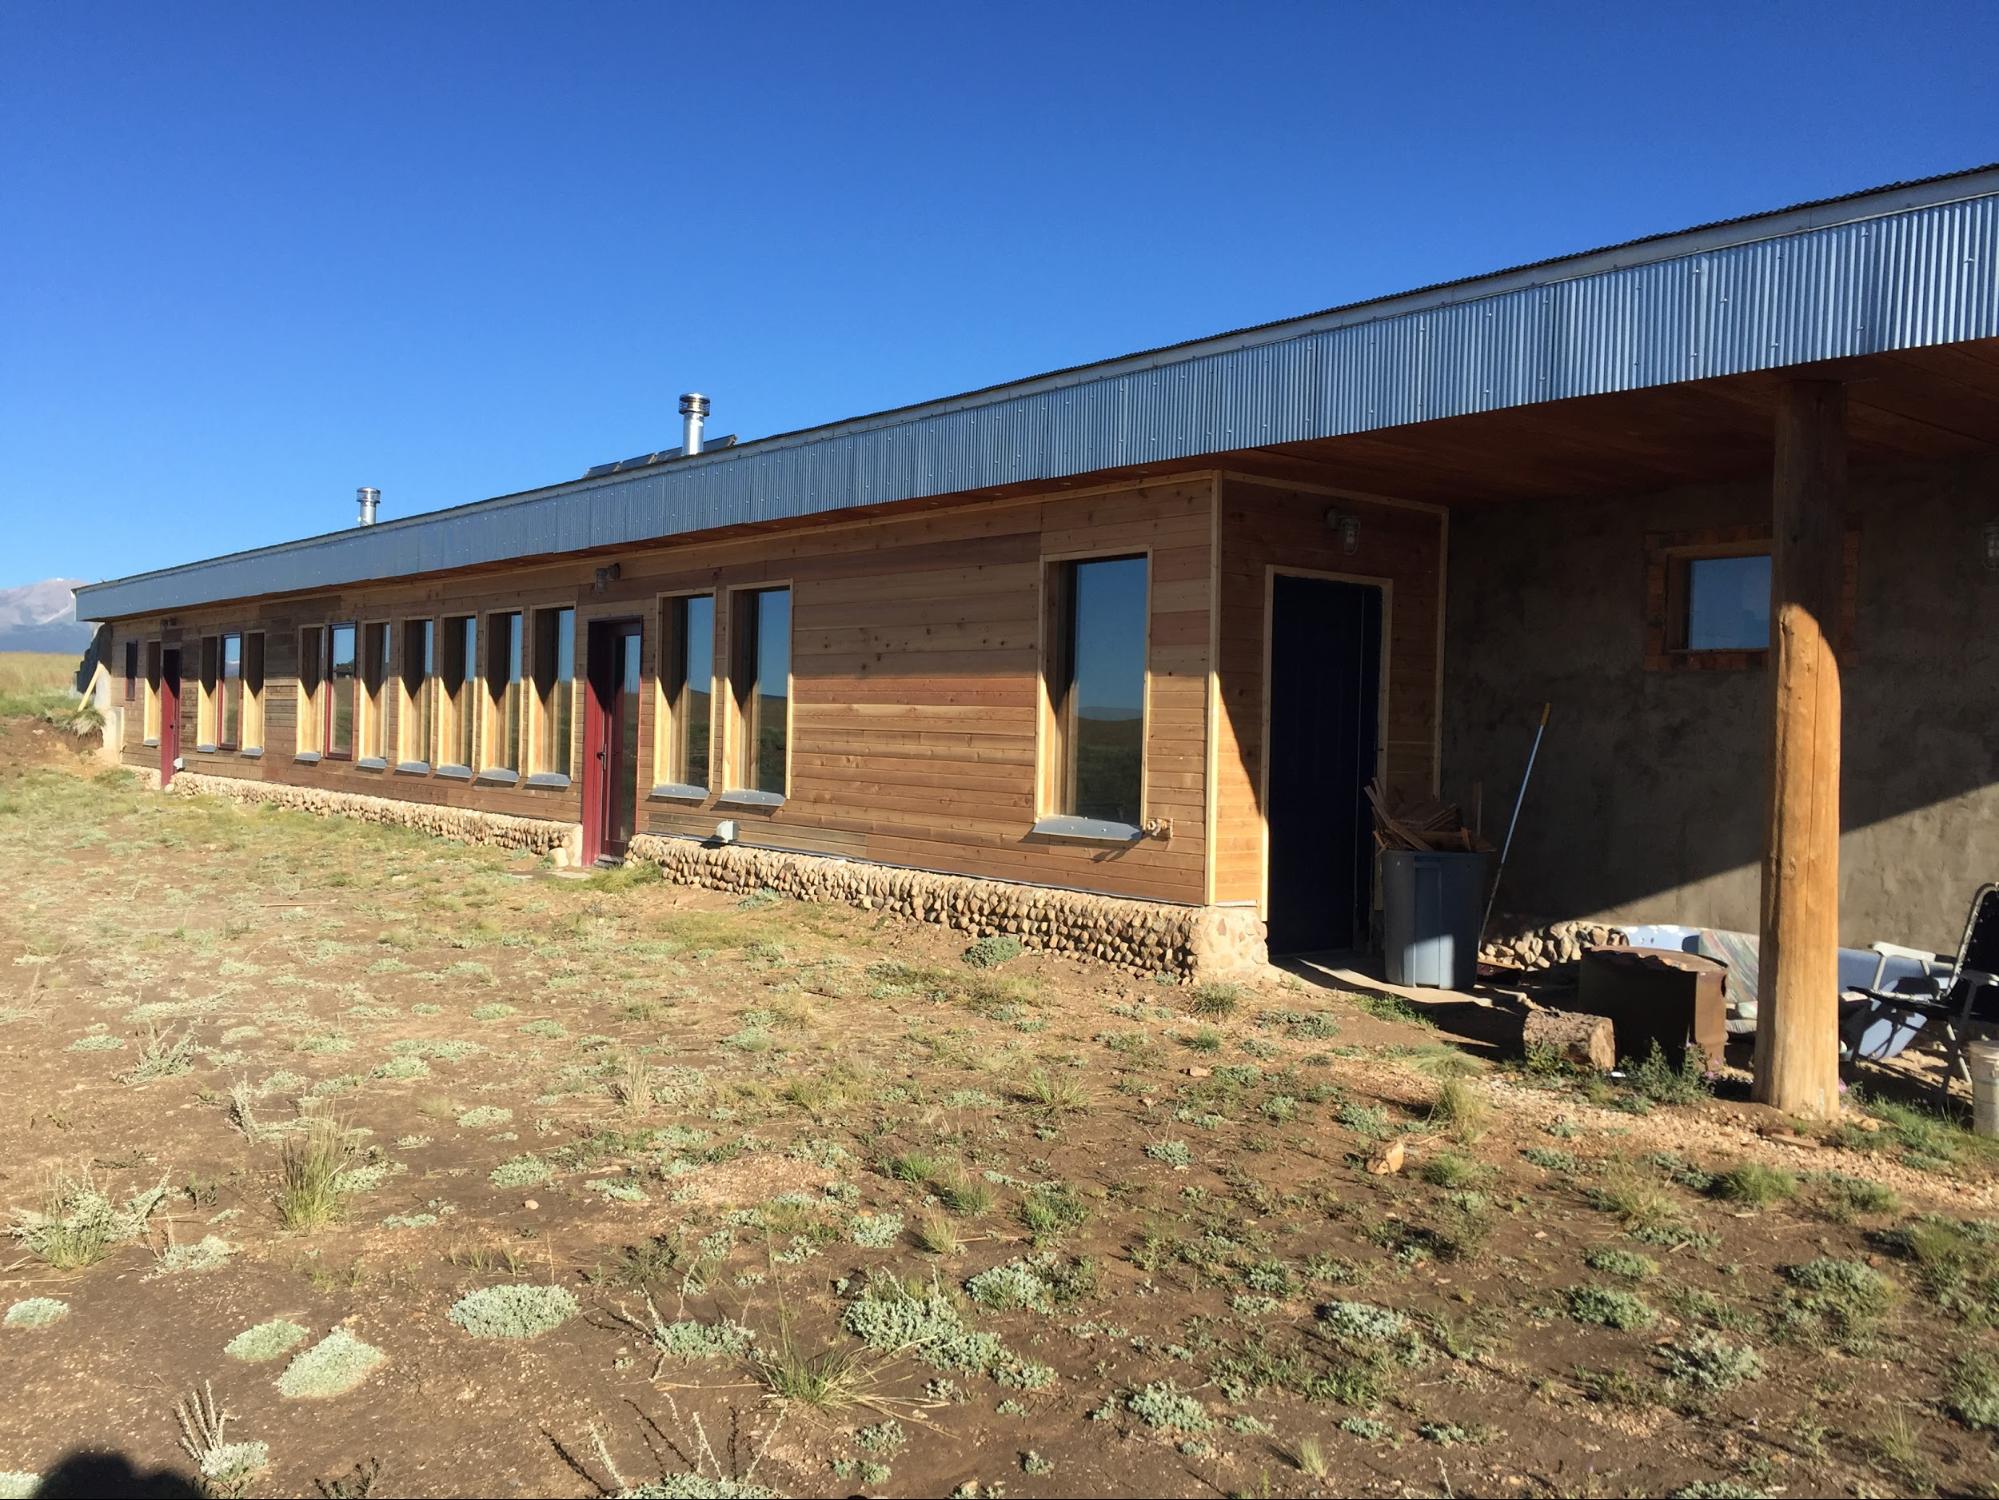 Living Off the Grid in an Eco-Friendly “Earthship”